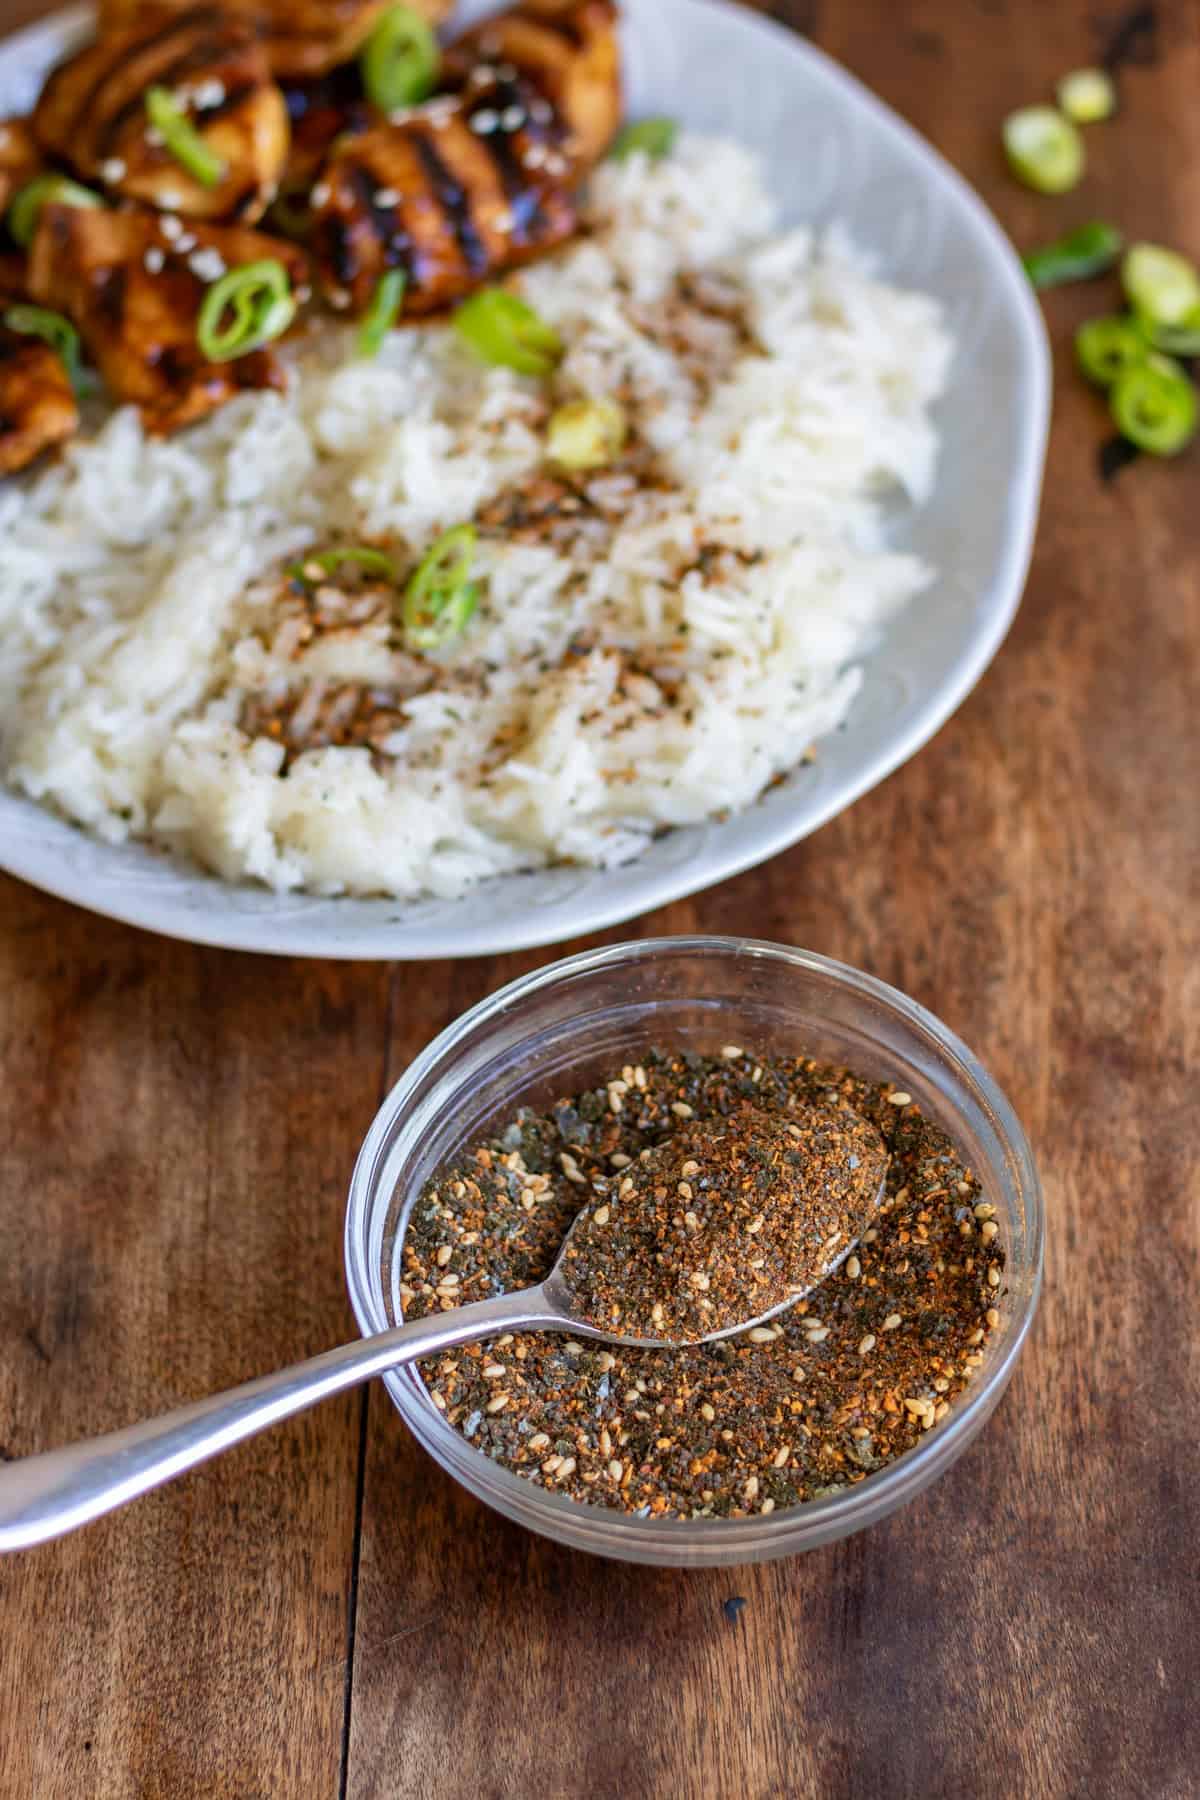 Spoon in a dish of shichimi togarashi, next to a plate of rice with some sprinkled on it.